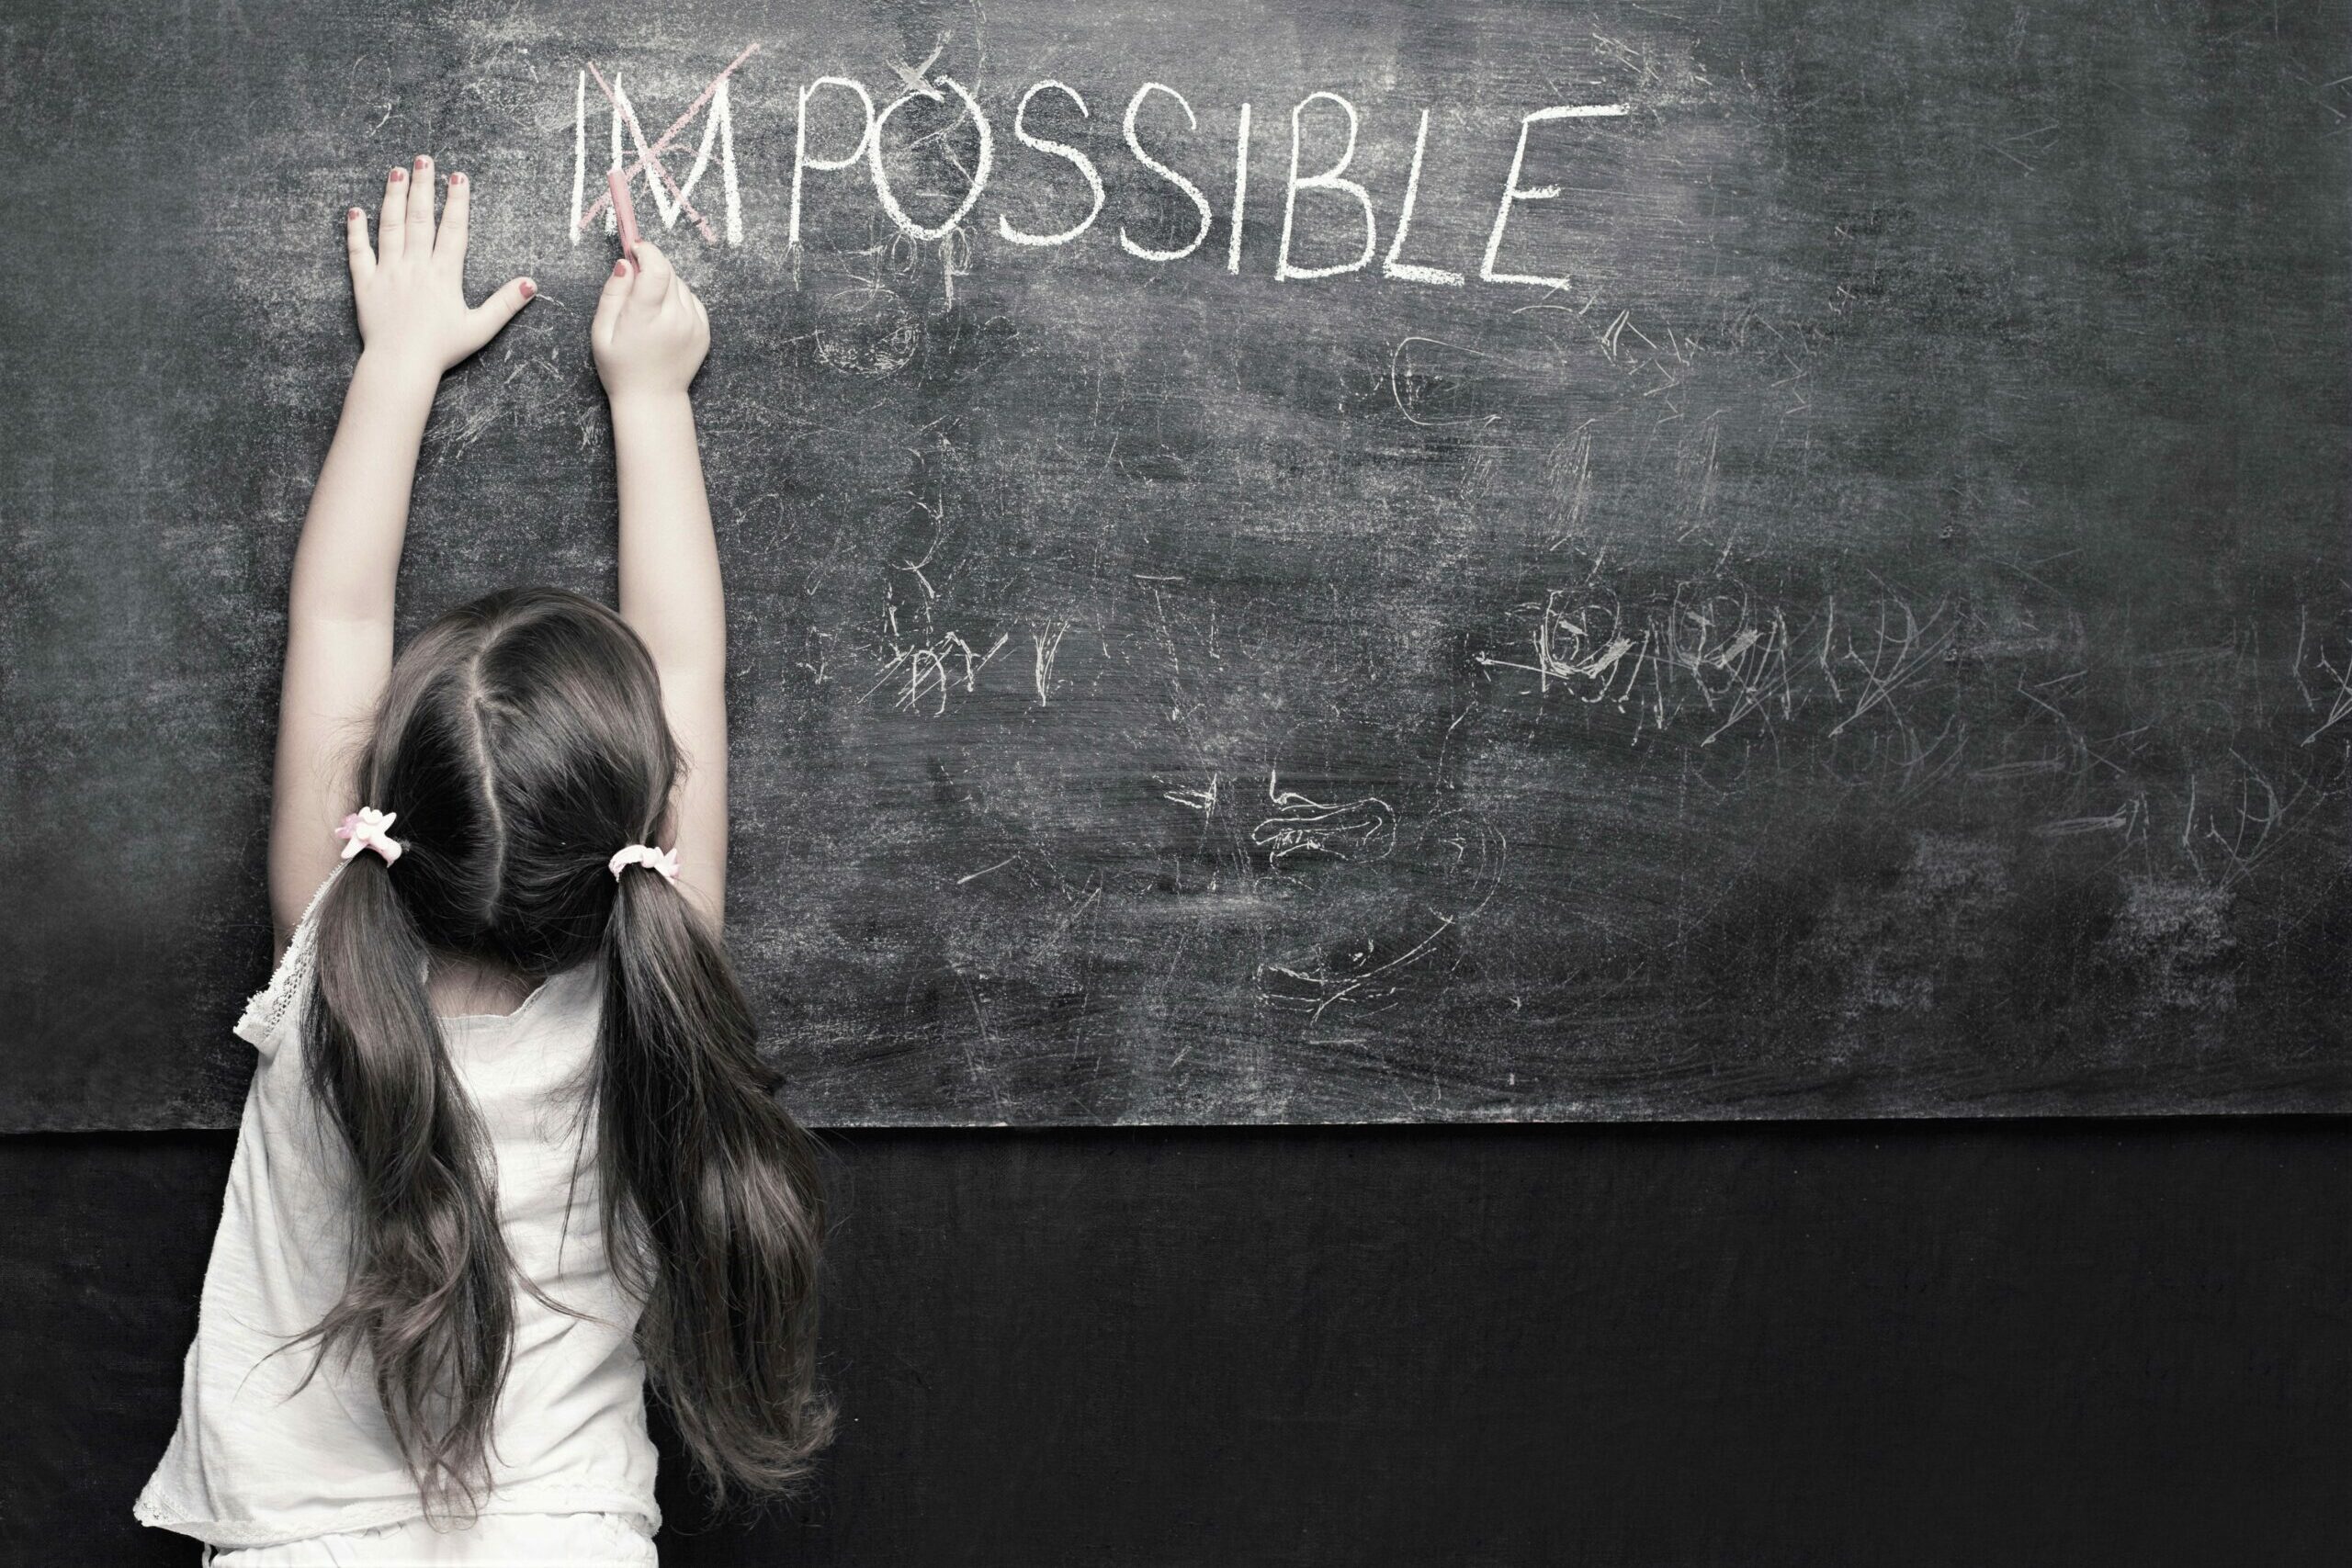 Cute,Little,Girl,Putting,A,Cross,Over,Impossible,On,Blackboard